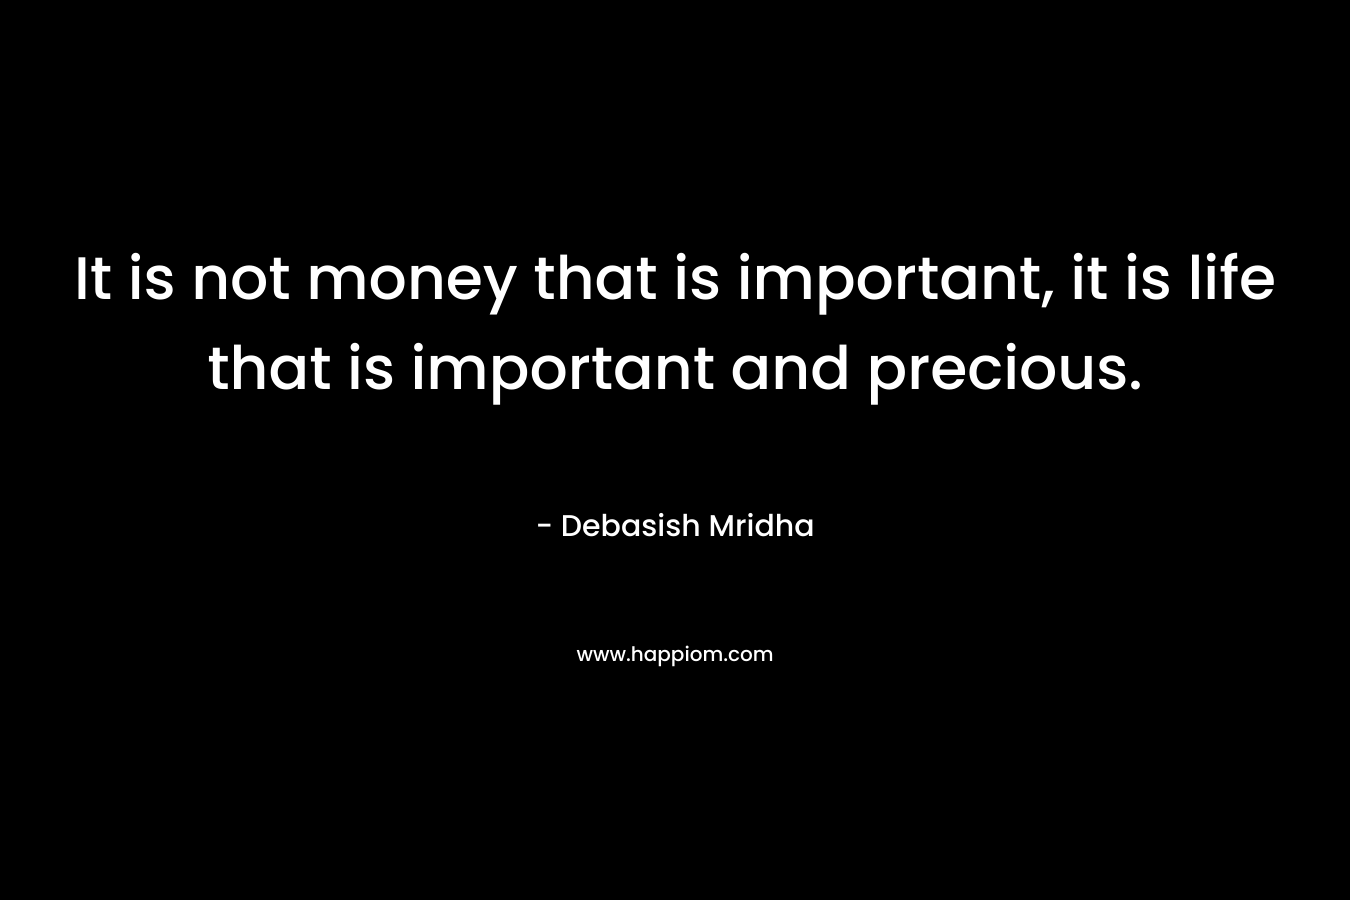 It is not money that is important, it is life that is important and precious.